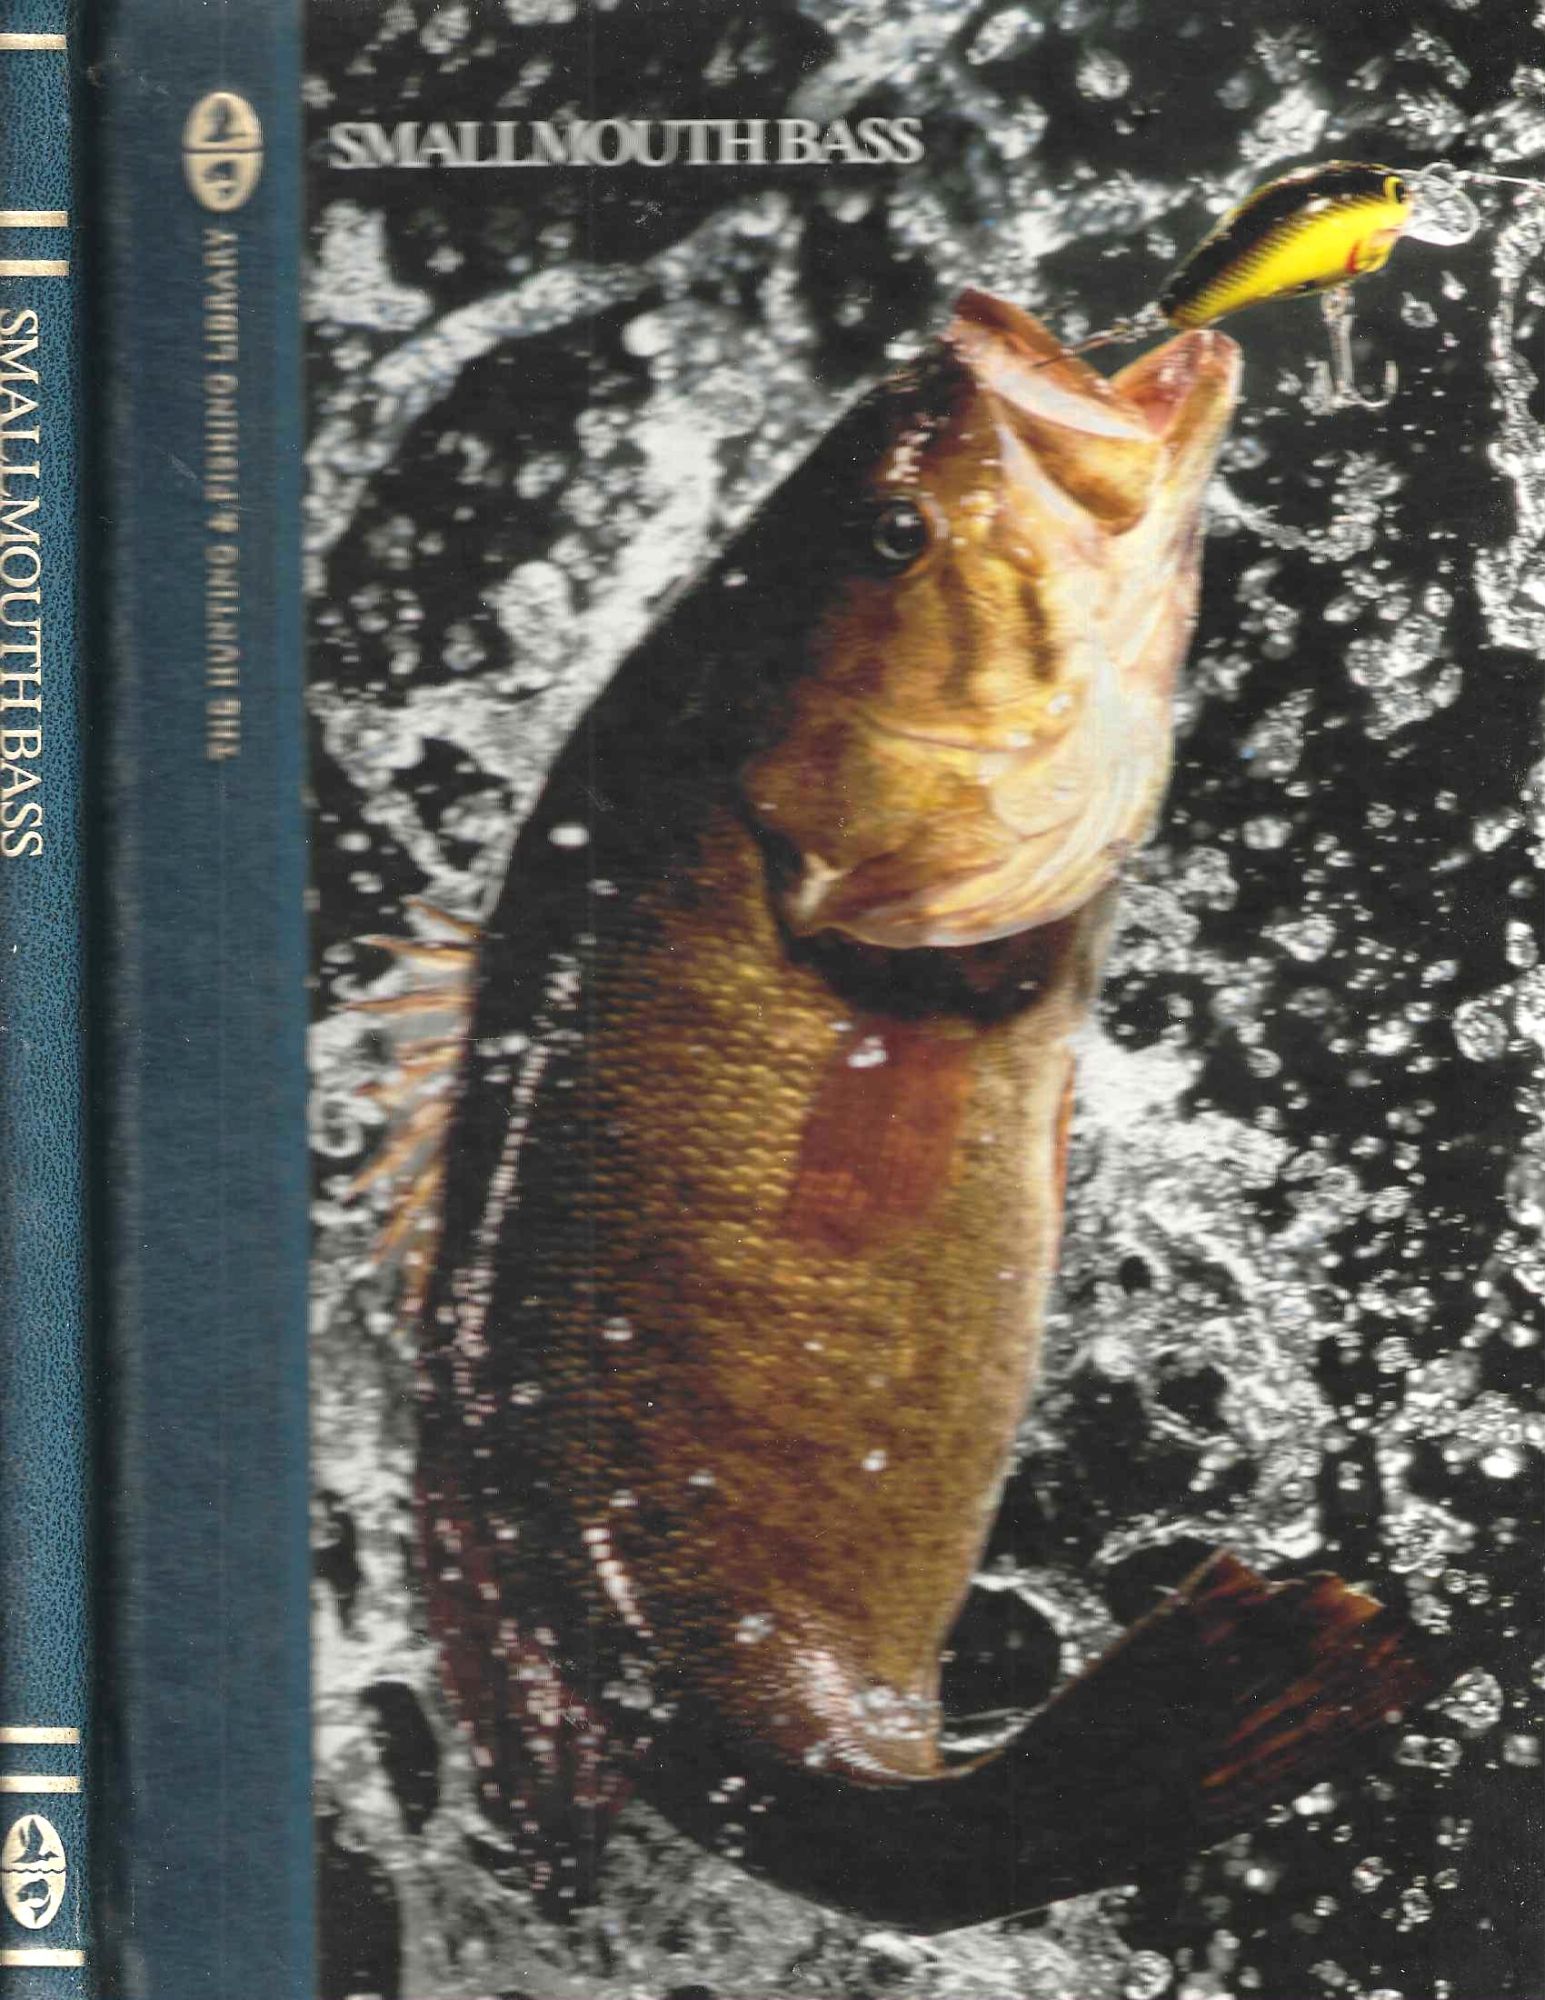 Smallmouth Bass The Hunting & Fishing Library by Dick Sternberg on Black's  Bookshop